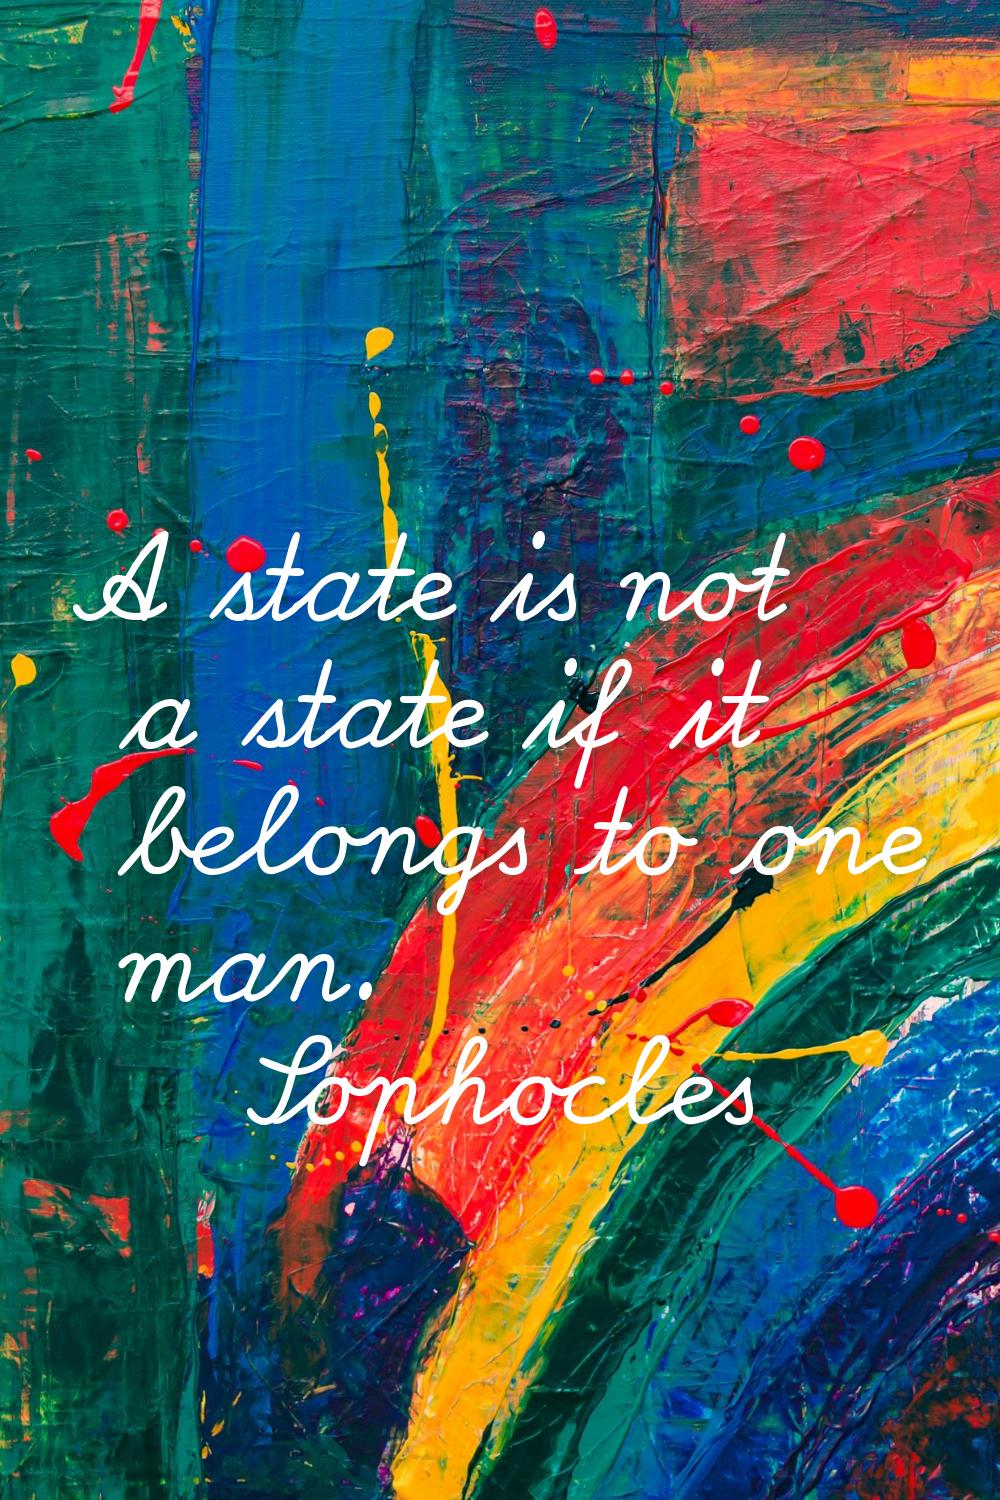 A state is not a state if it belongs to one man.